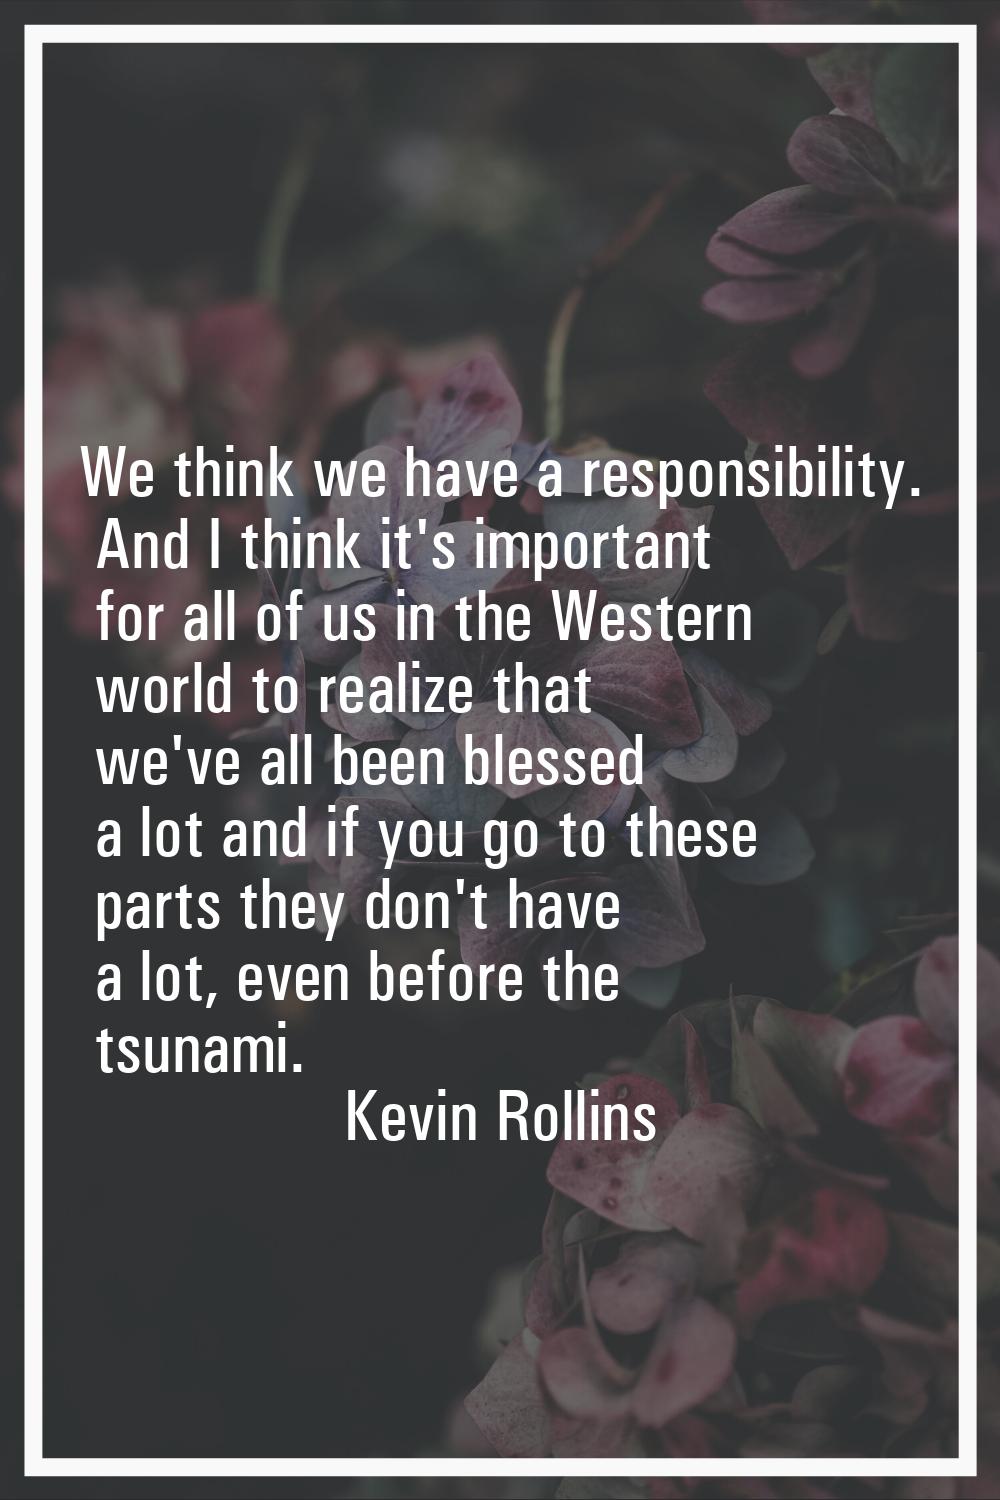 We think we have a responsibility. And I think it's important for all of us in the Western world to